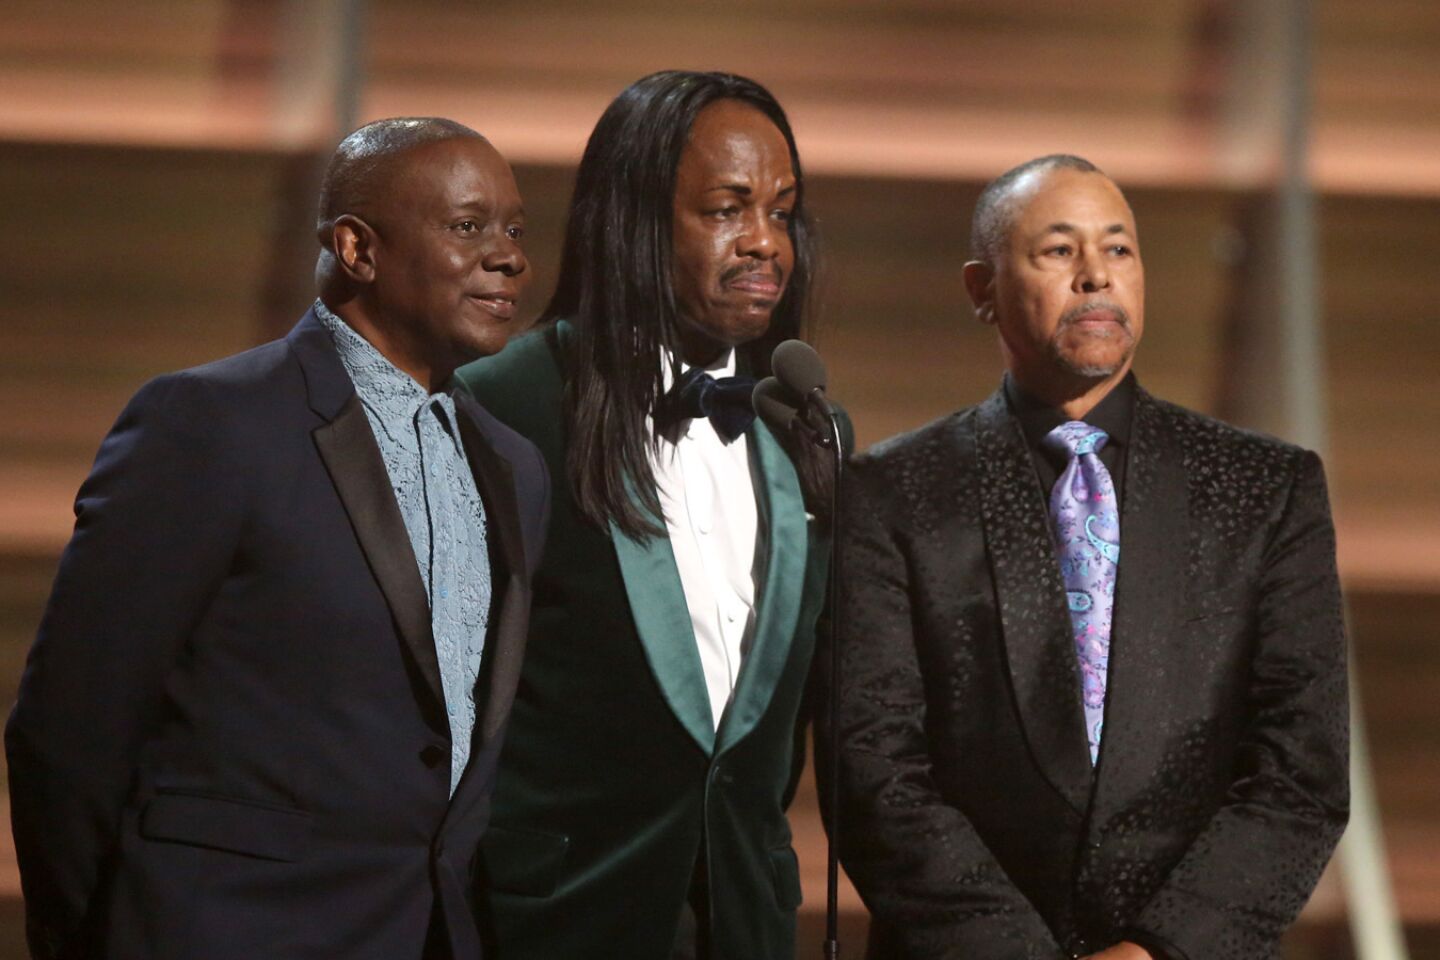 Philip Bailey, from left, Verdine White and Ralph Johnson of Earth Wind & Fire present the award for album of the year.